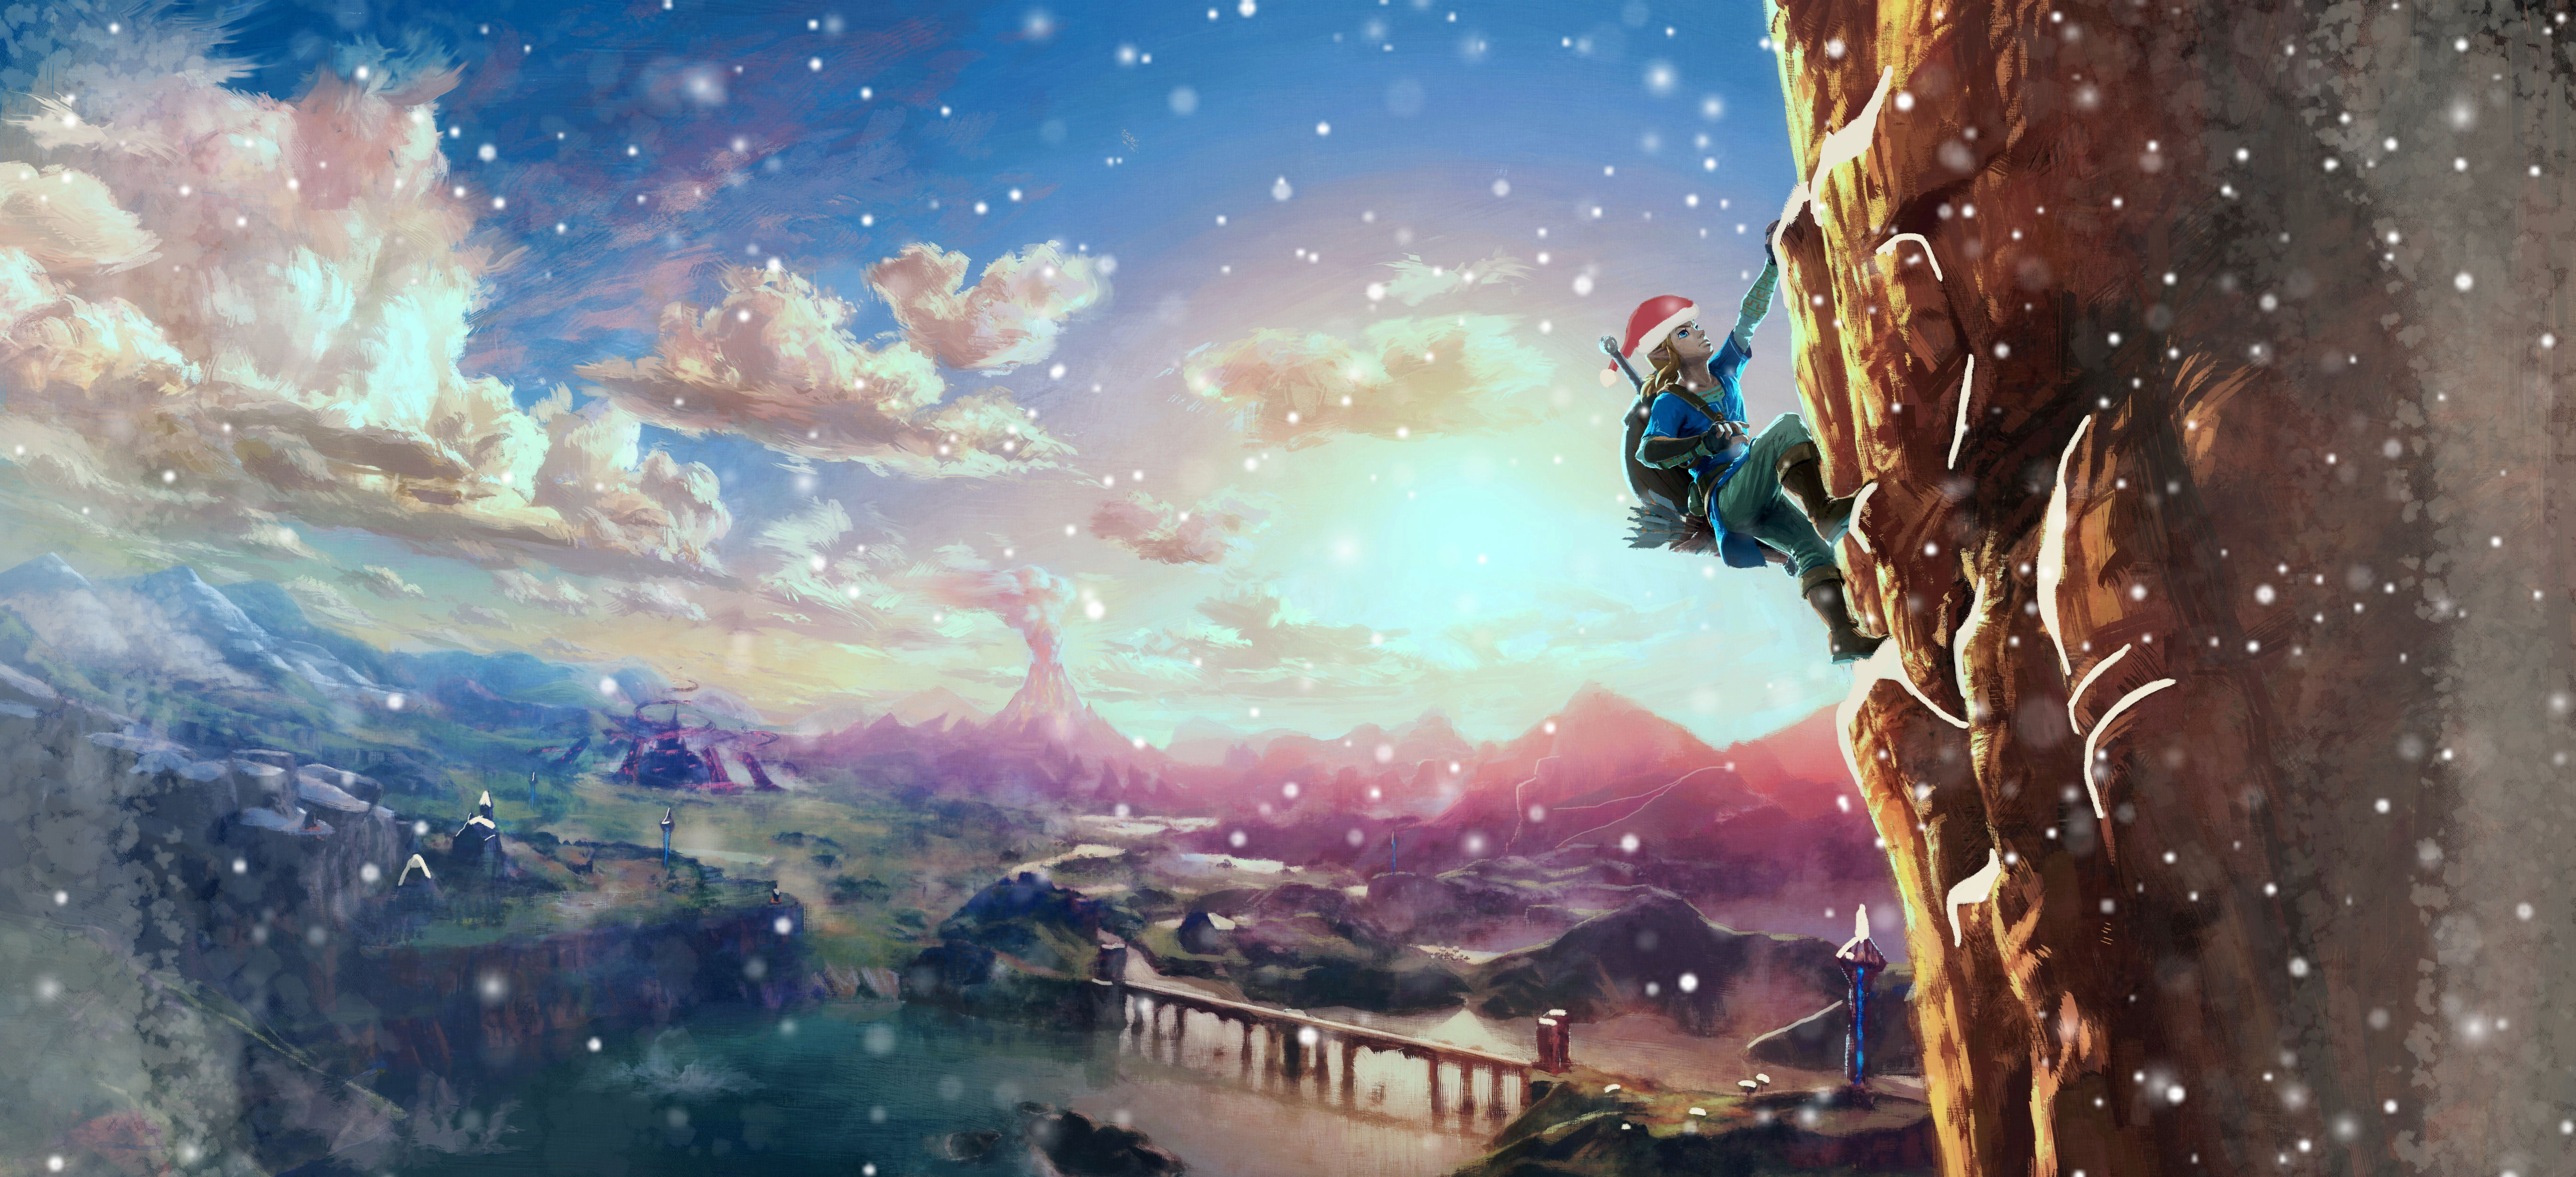 I Gave My Desktop Wallpaper A Christmas Theme! Hope You Like It Too, R Breath_of_the_Wild